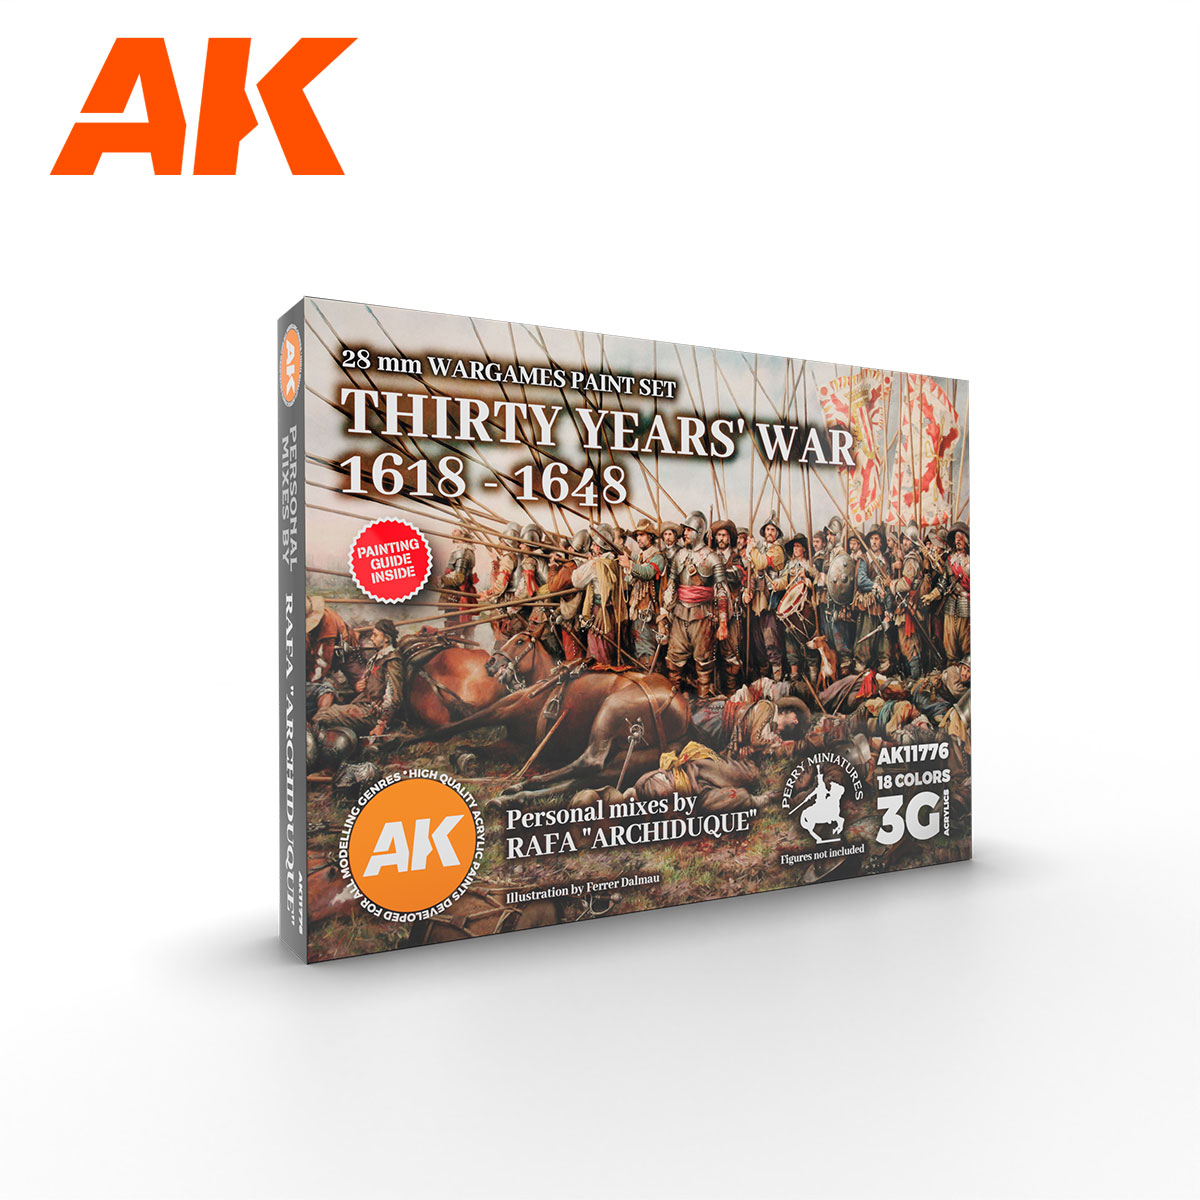 AK Interactive 3rd Generation Full Racks and Paint sets all in store! 